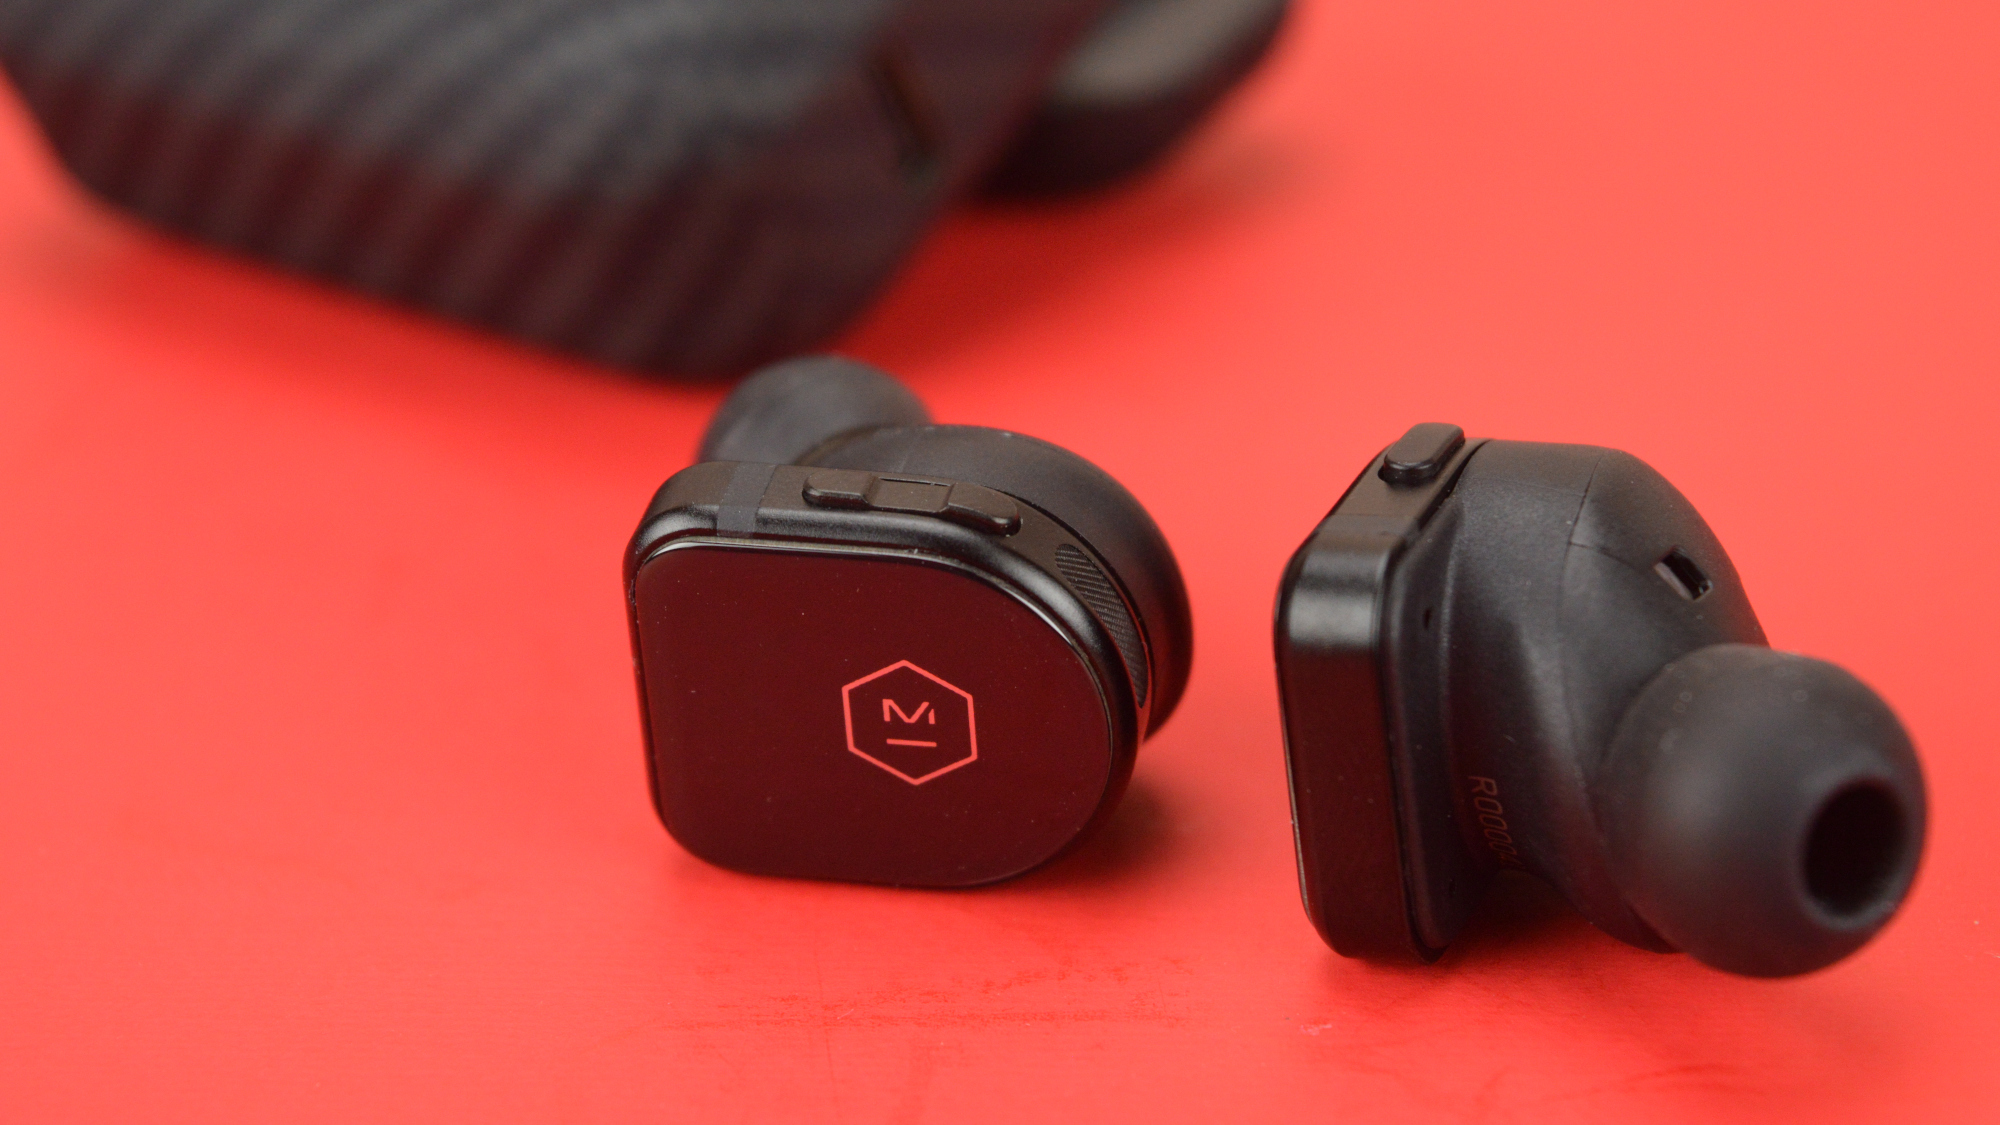 Louis Vuitton's new wireless earbuds cost $1,000 — as dumb as it sounds -  Android Authority